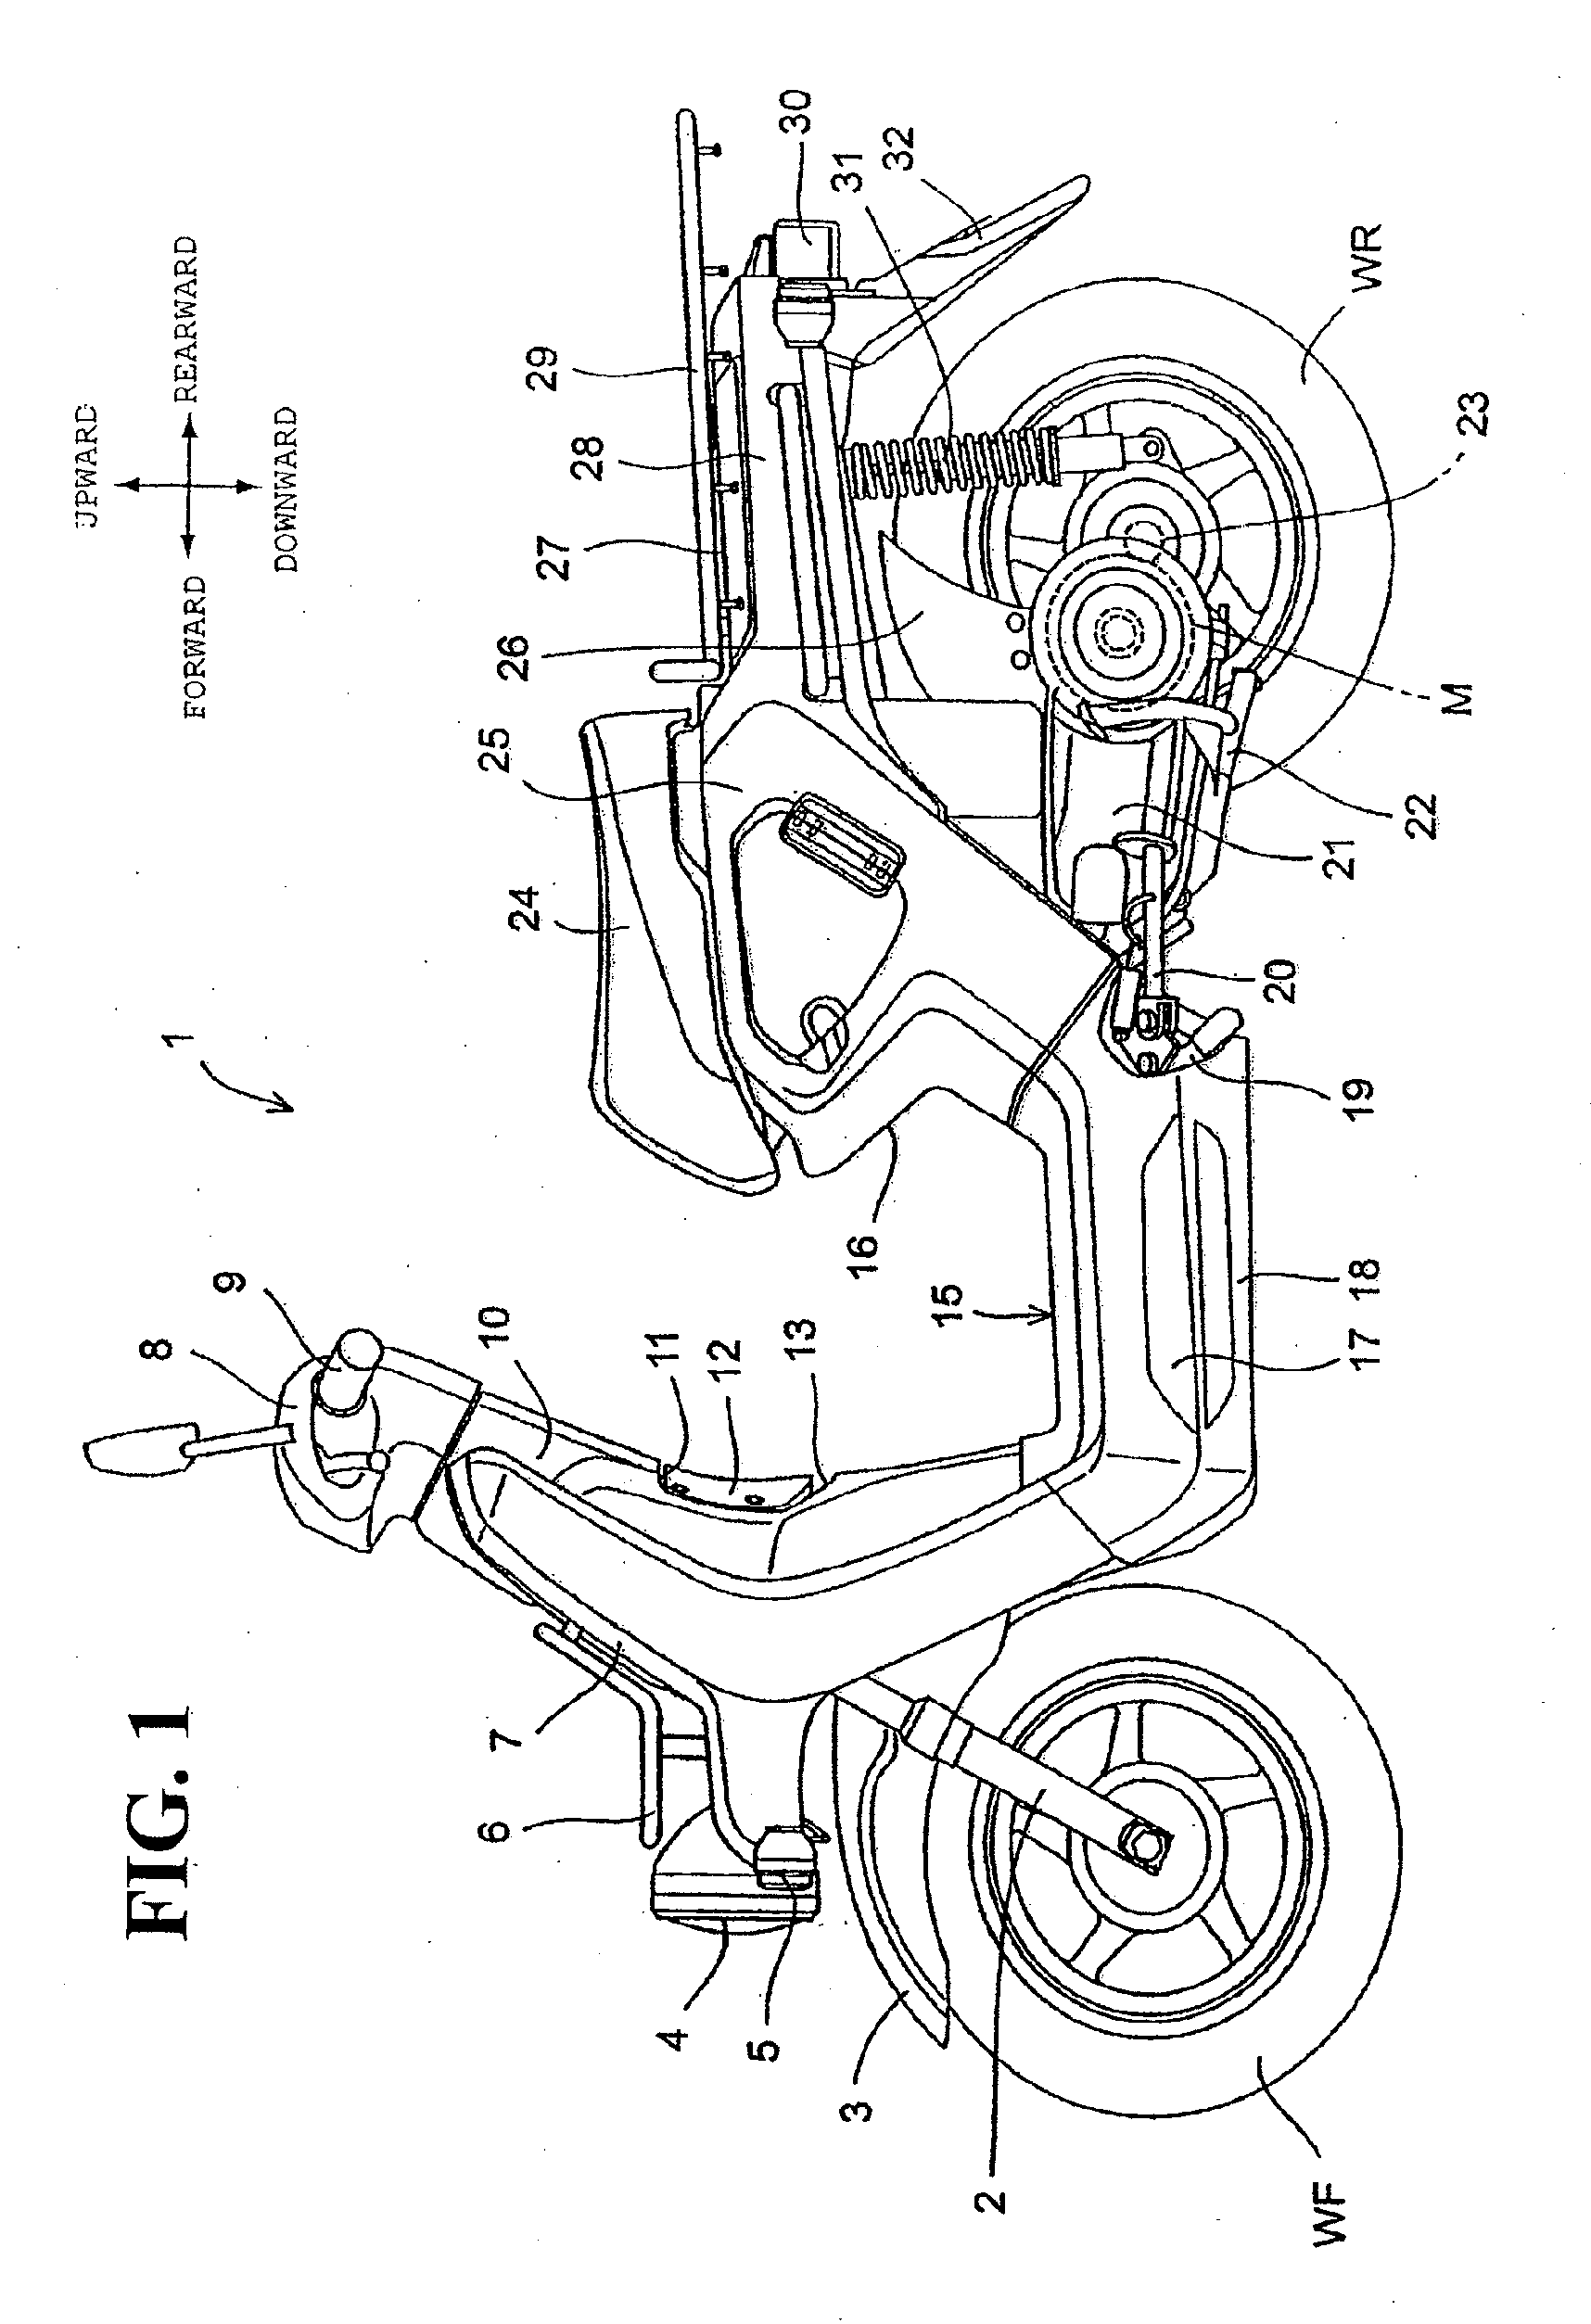 Vehicle approach notification control apparatus for electric motorcycle